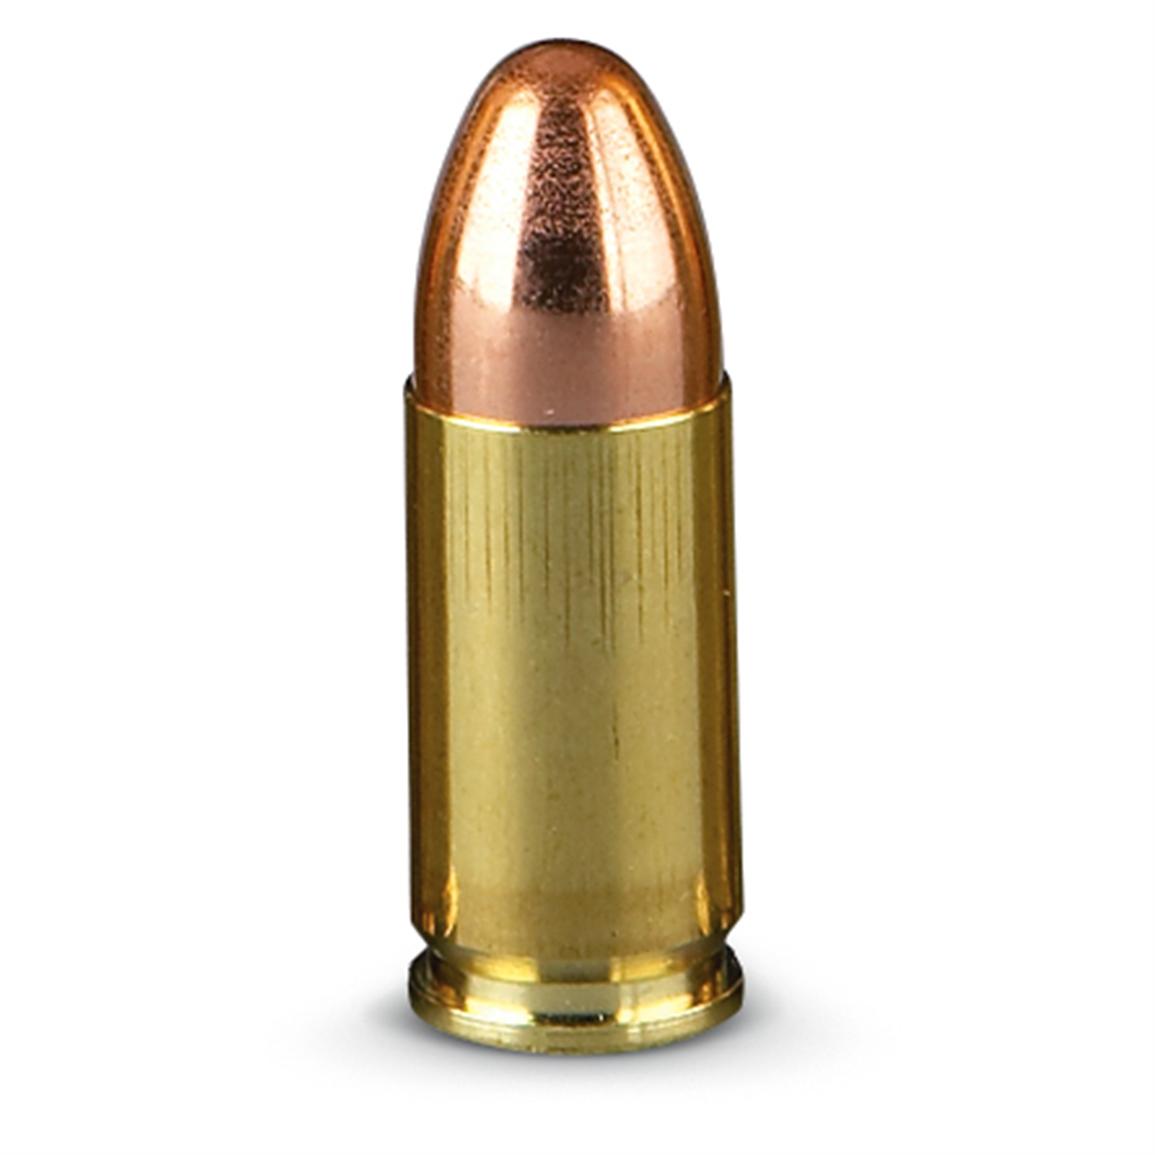 9 mm, FMJ, 124 Grain, 500 Rounds - 178269, 9mm Ammo at Sportsman's Guide